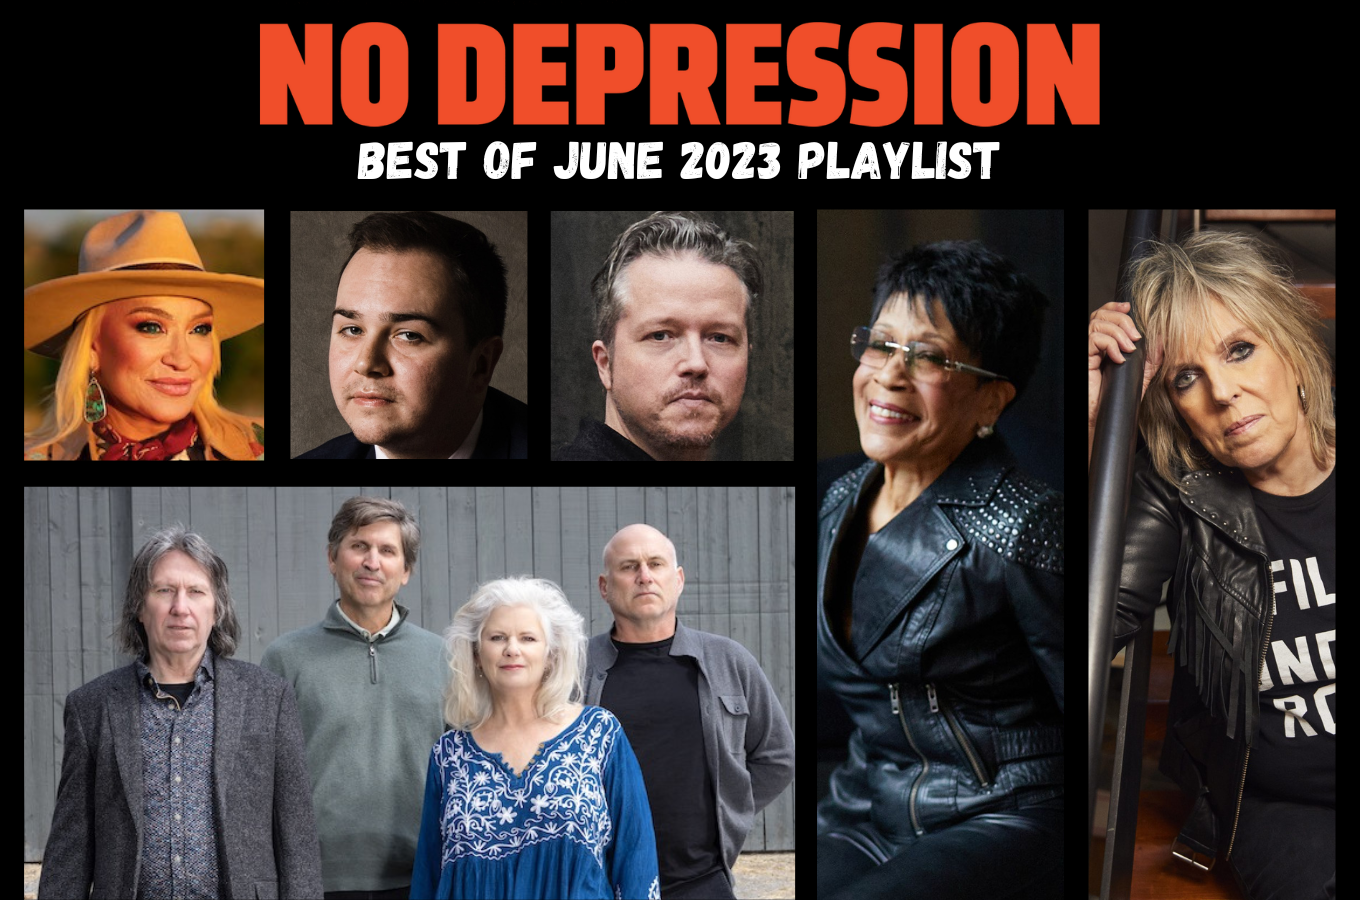 The Best of June playlist features, clockwise from top left, Tanya Tucker, Tommy Prine, Jason Isbell, Bettye LaVette, Lucinda Williams, and Cowboy Junkies.